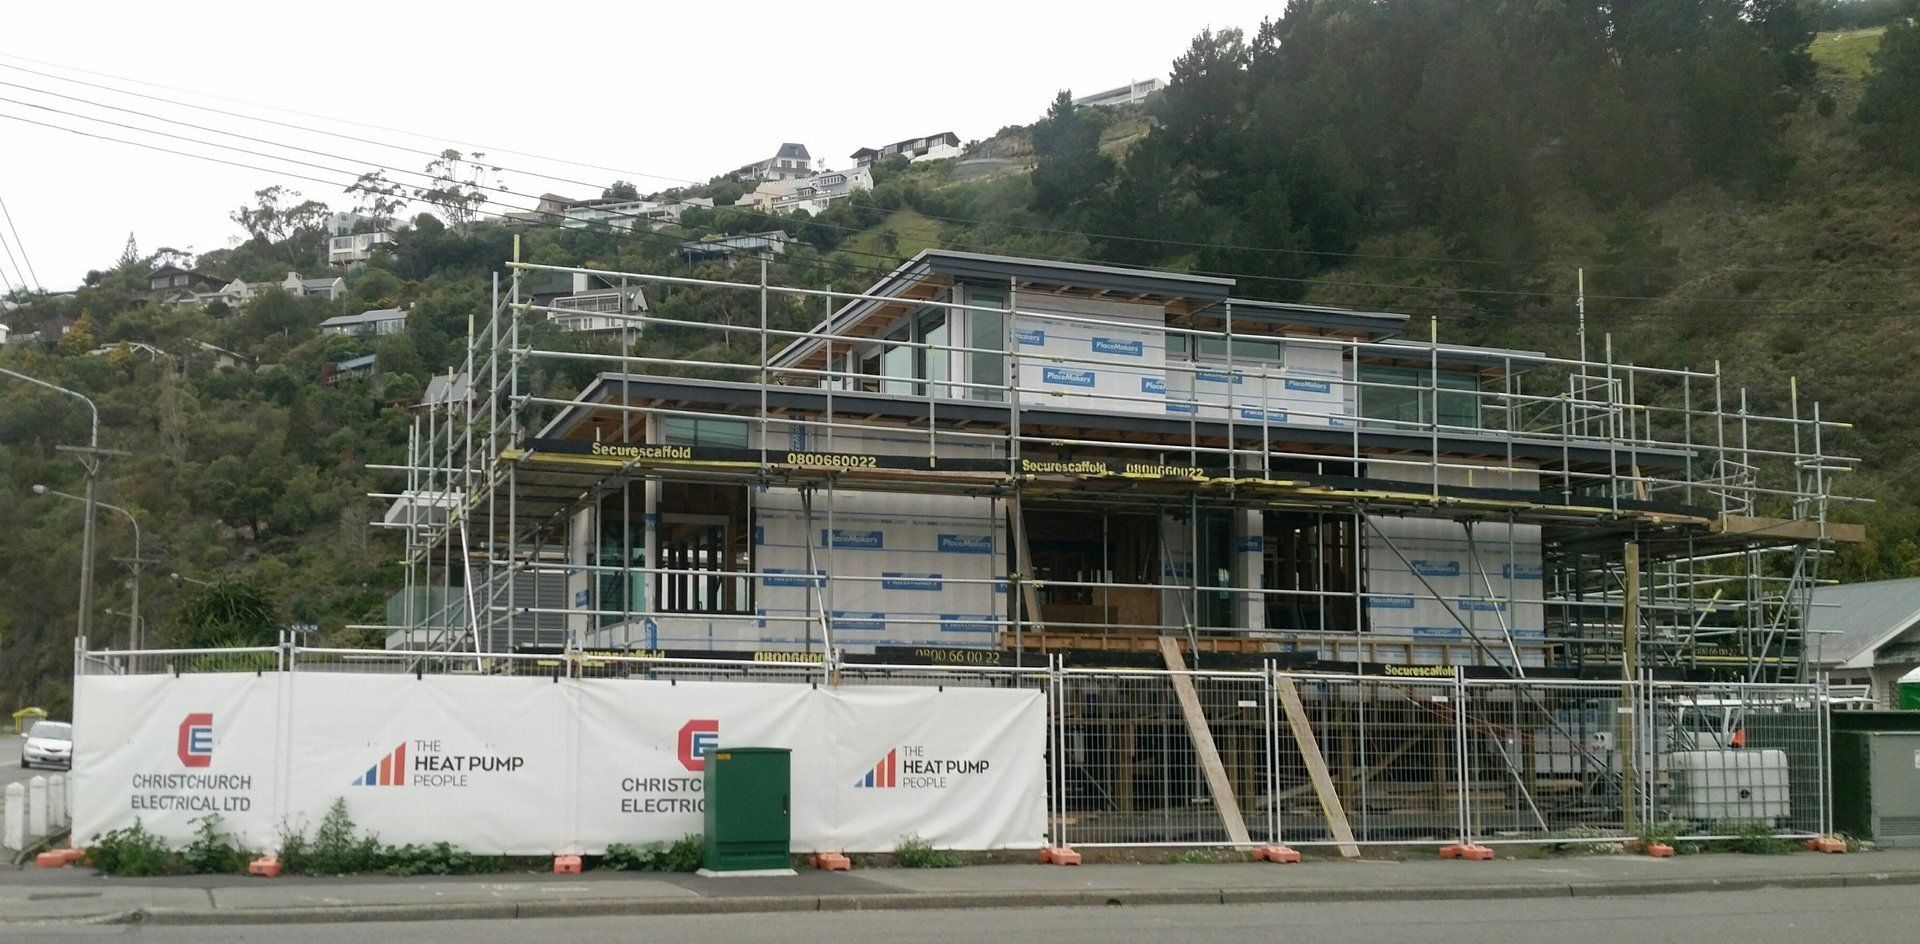 Building under construction, fence signage Christchurch Electrical, The Heat Pump People